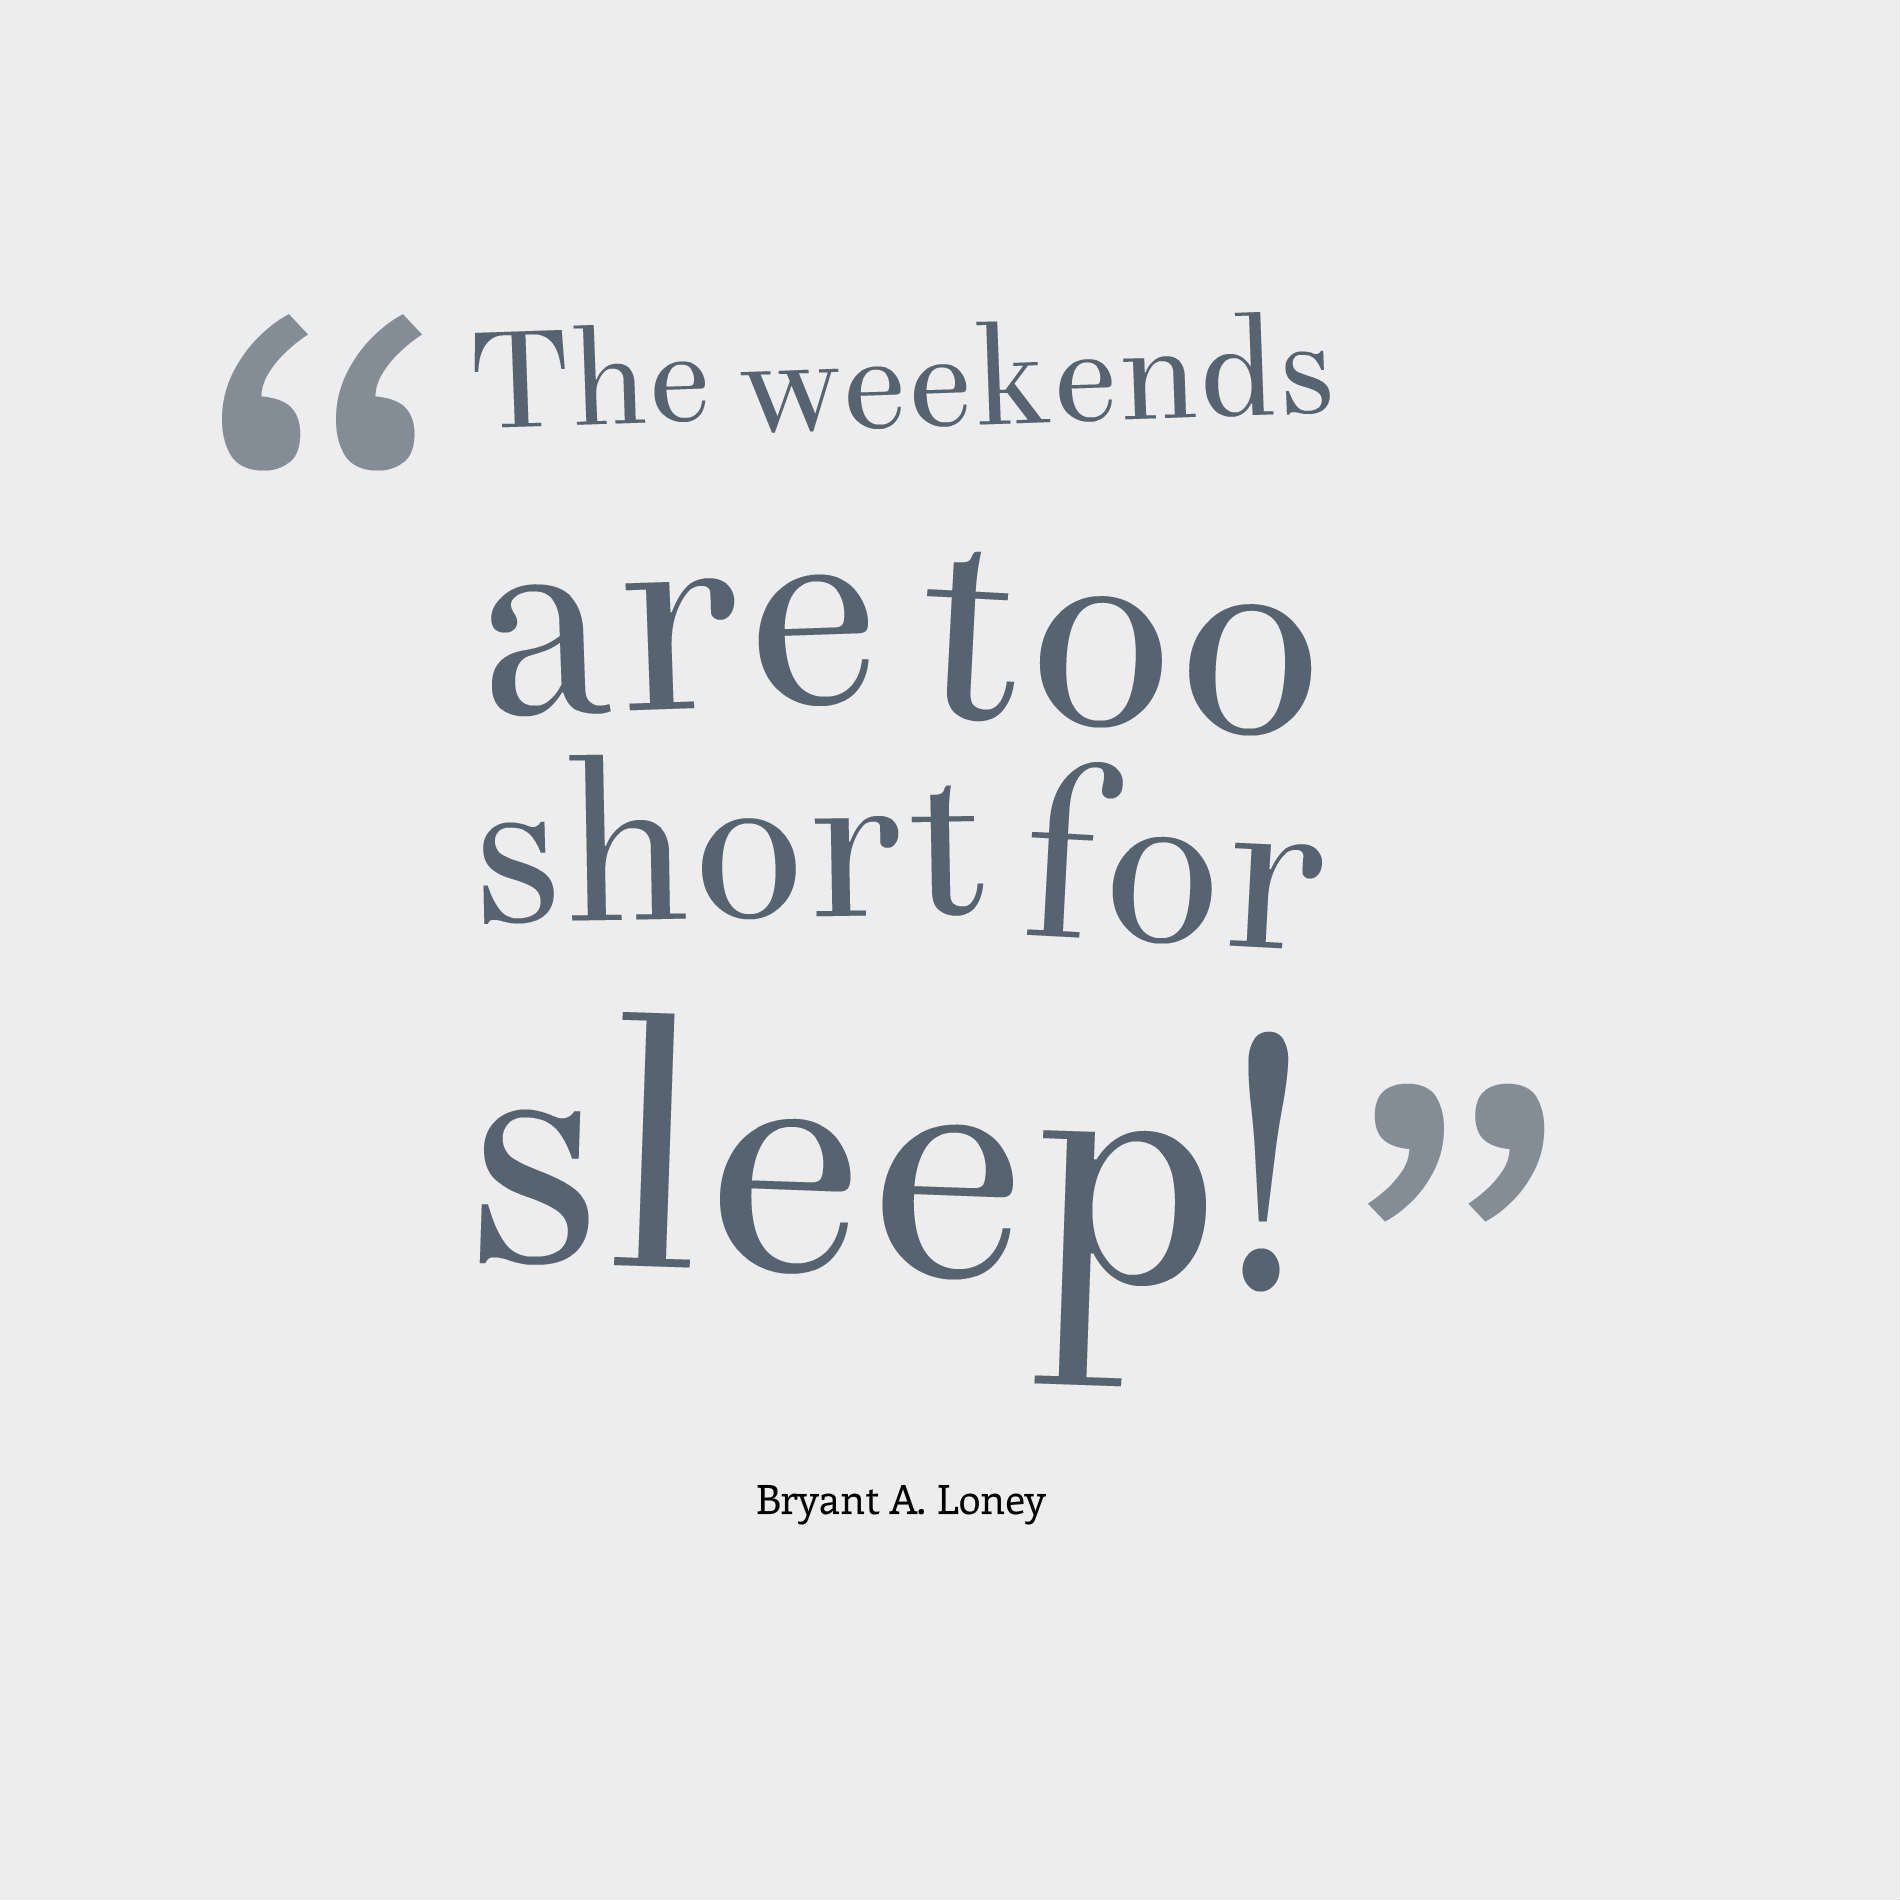 The weekends are too short for sleep!